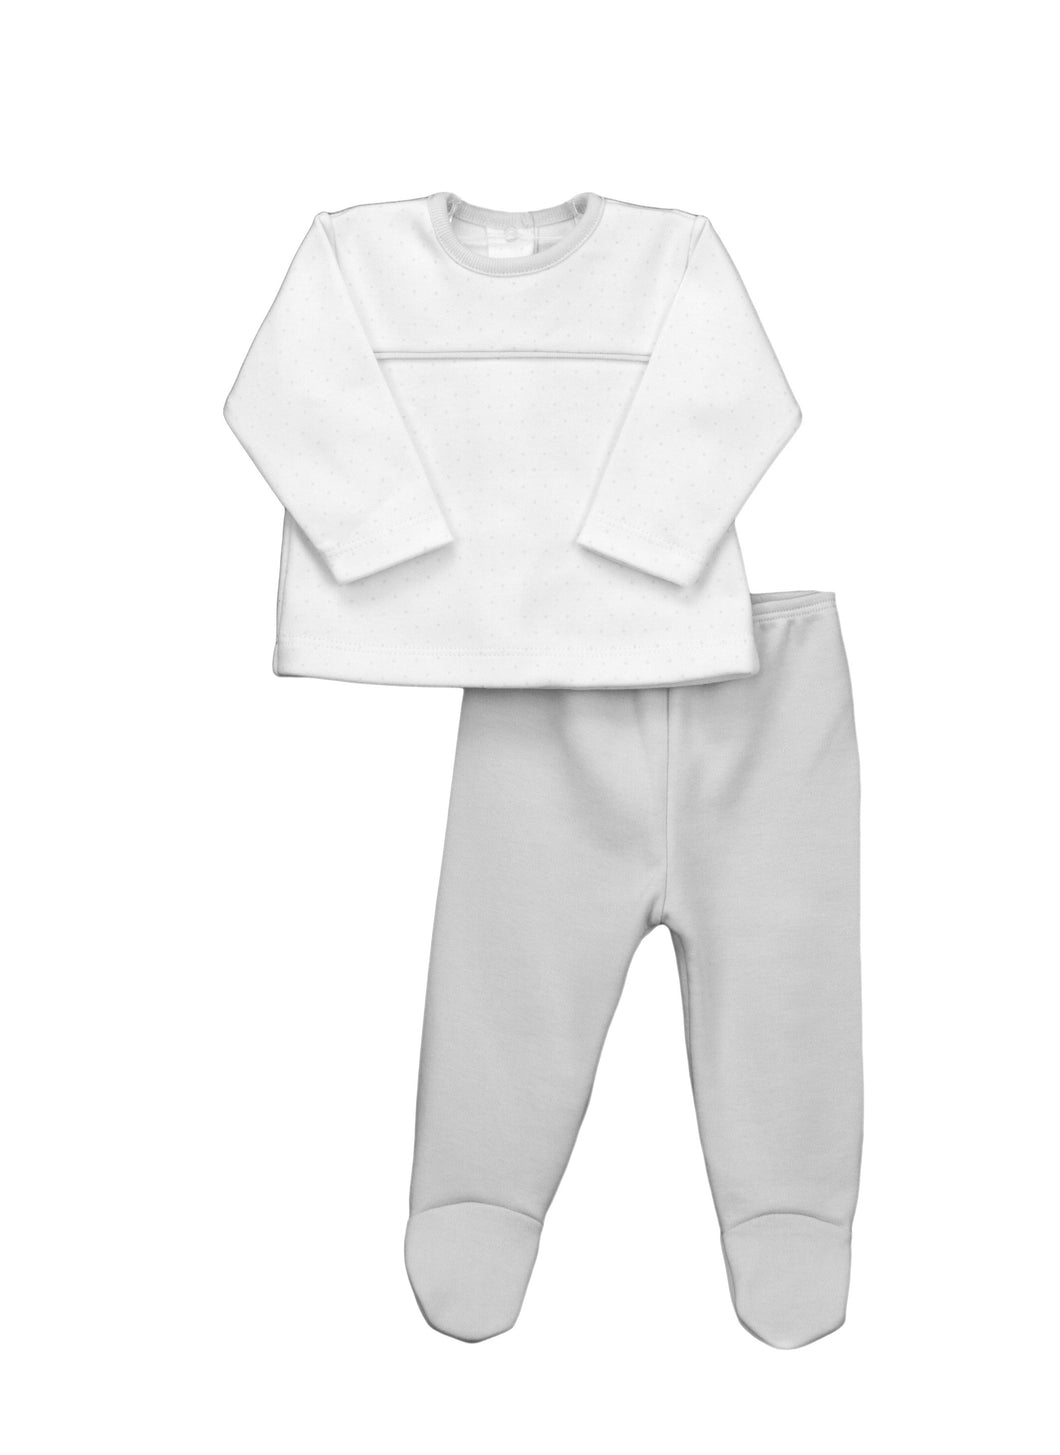 Baby Boys Set with Long Sleeved Spotted Top with Contrasting Trim on Neckline and Chest and Plain Bottoms with Feet.in Soft Cotton Gift Box